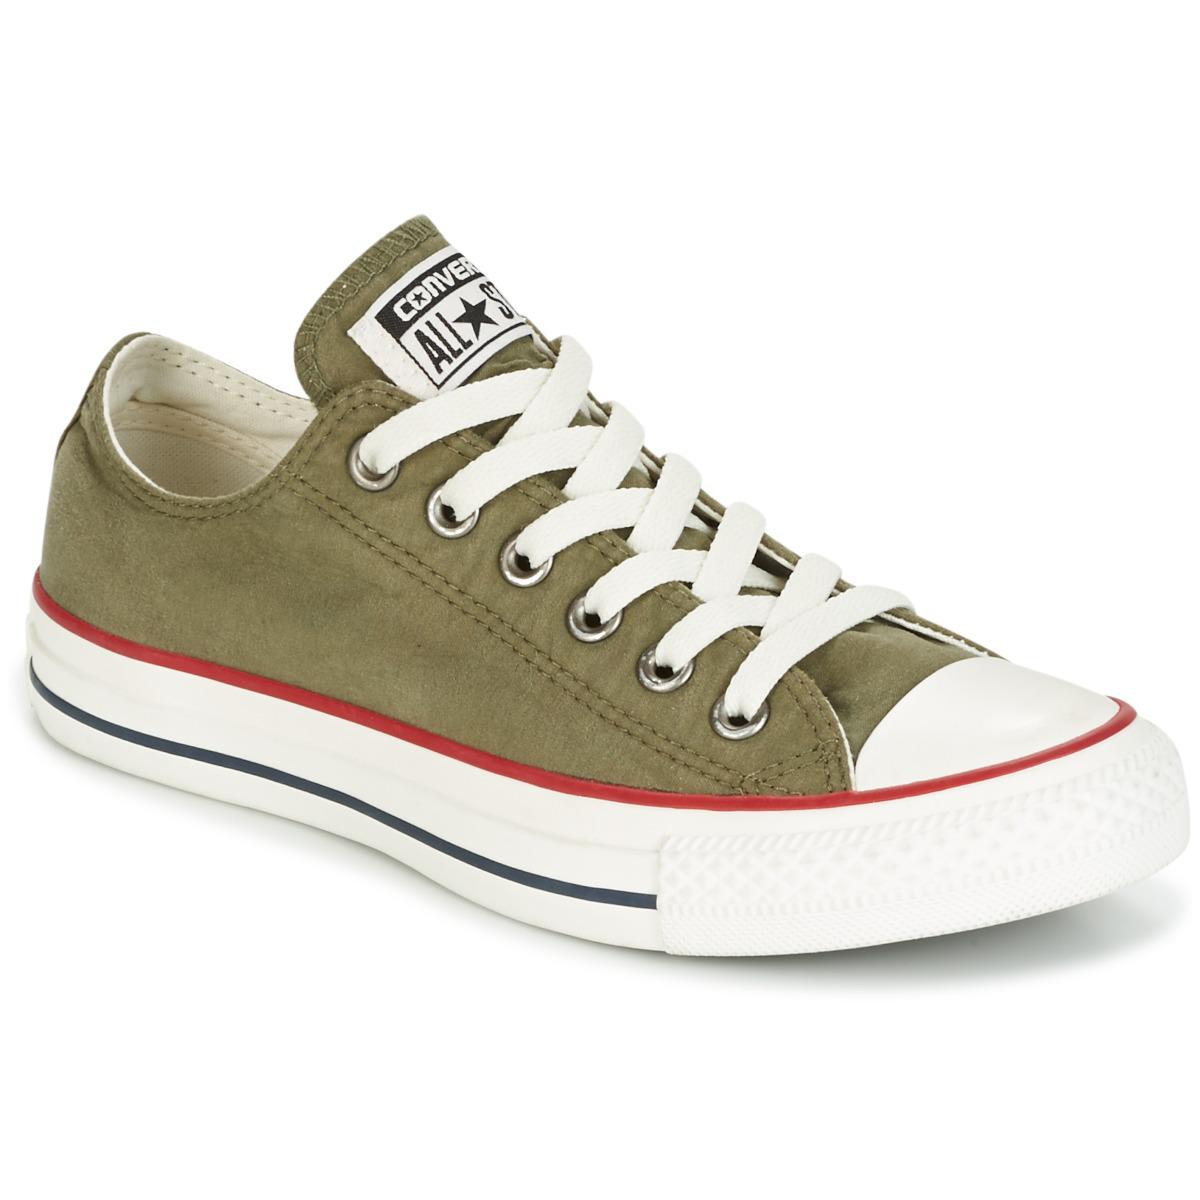 converse chuck taylor all star ox ombre wash sneaker